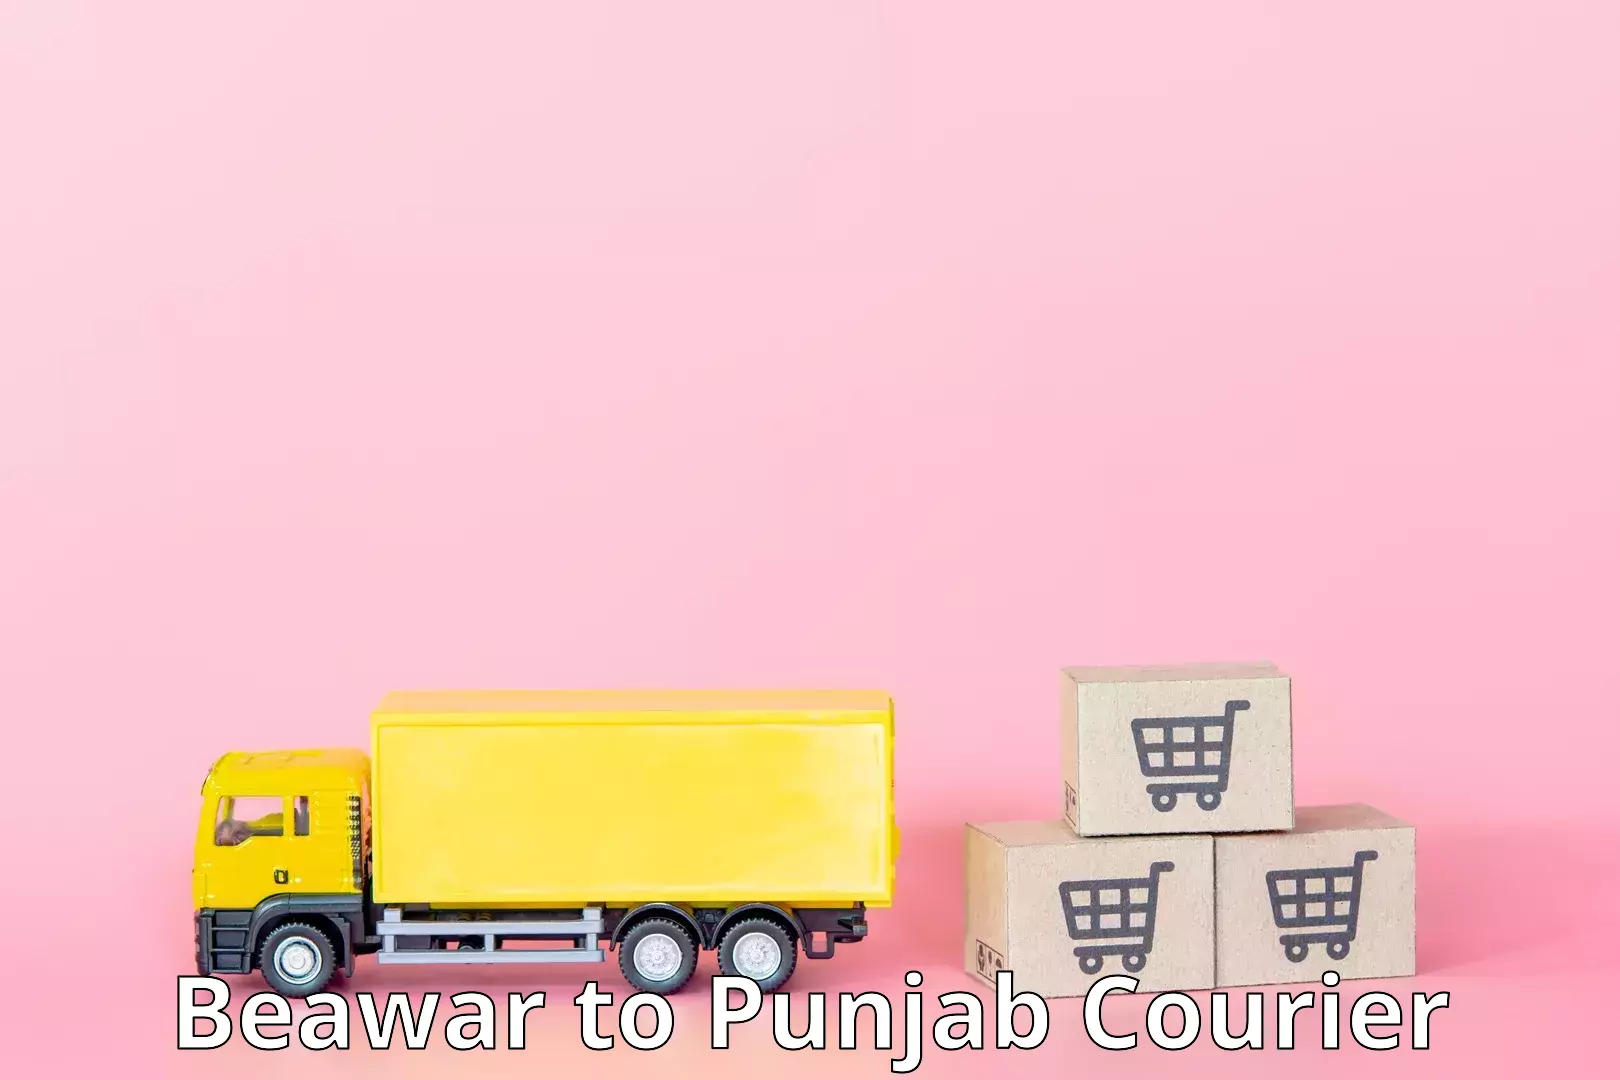 Reliable logistics providers Beawar to Amritsar